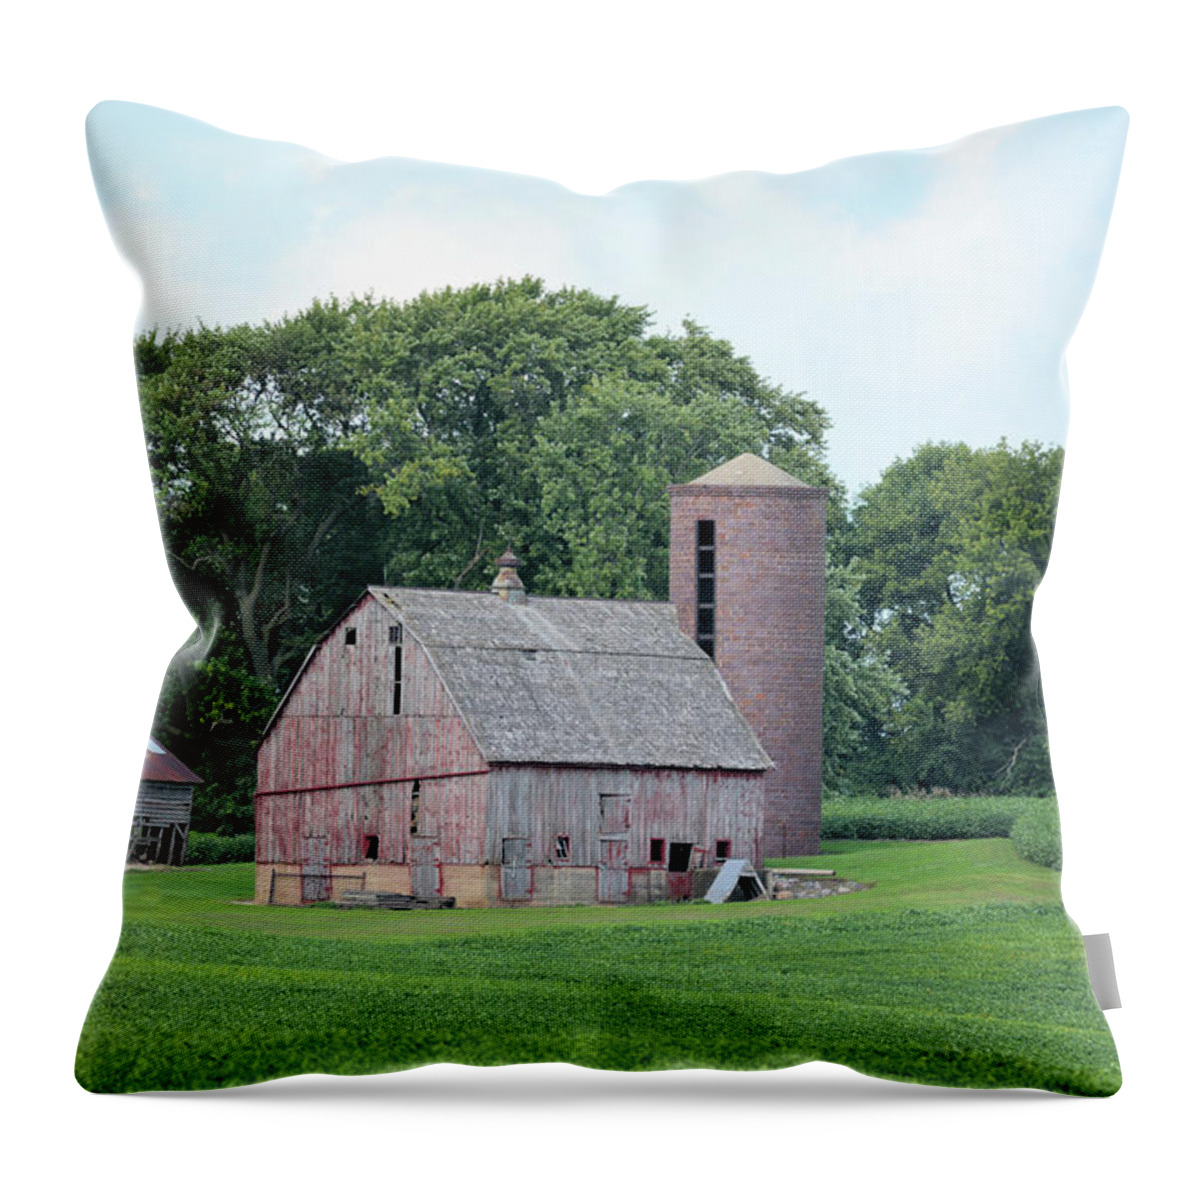 Green Throw Pillow featuring the photograph Kossuth Farm by Bonfire Photography